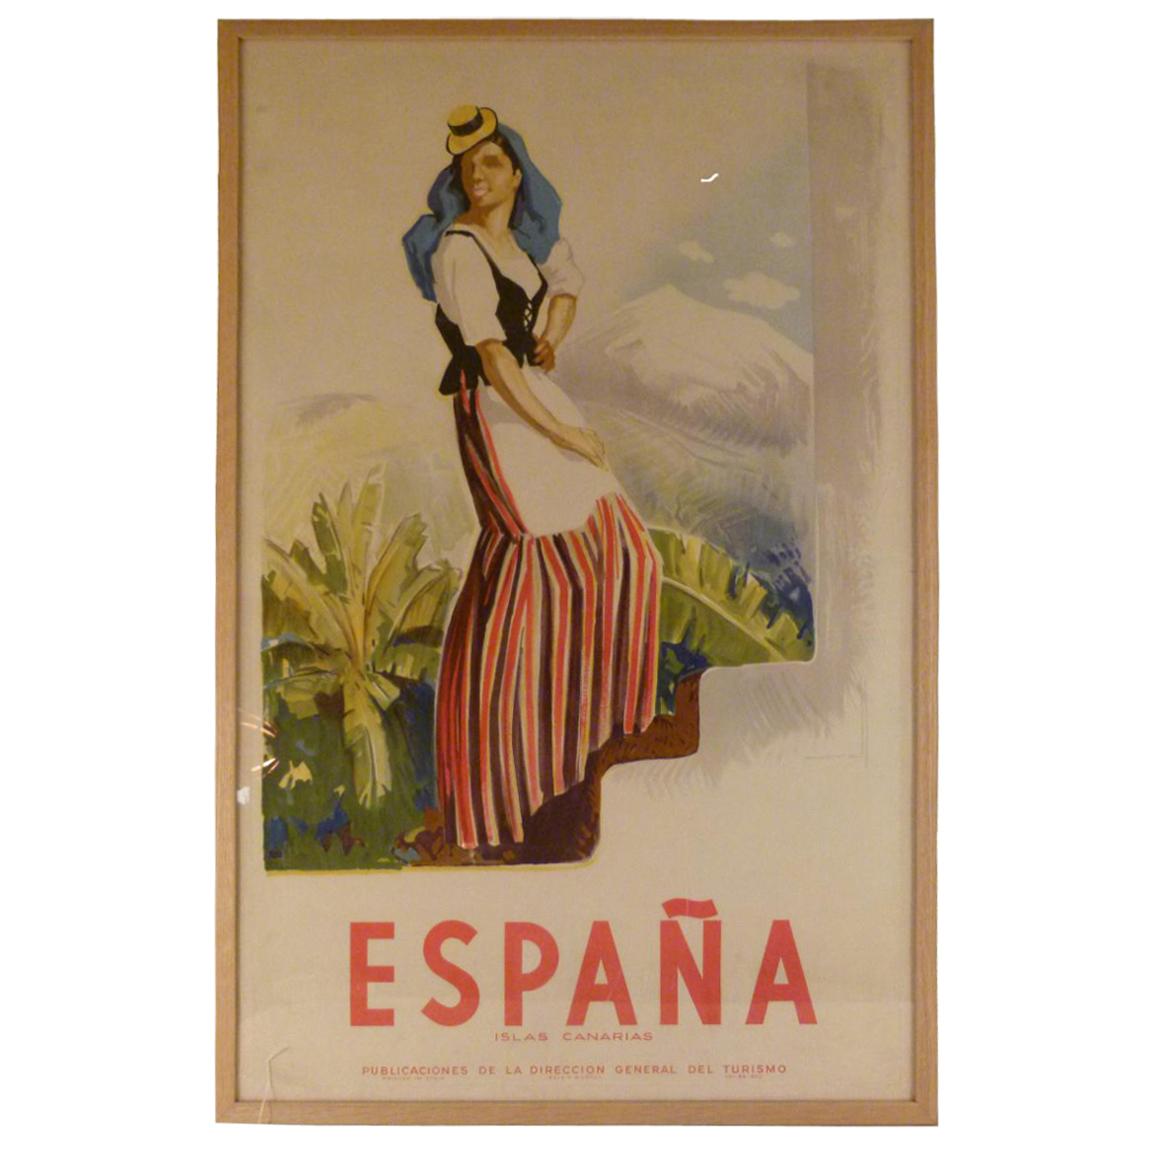 Canary Islands Poster by Josep Morell, 1940s